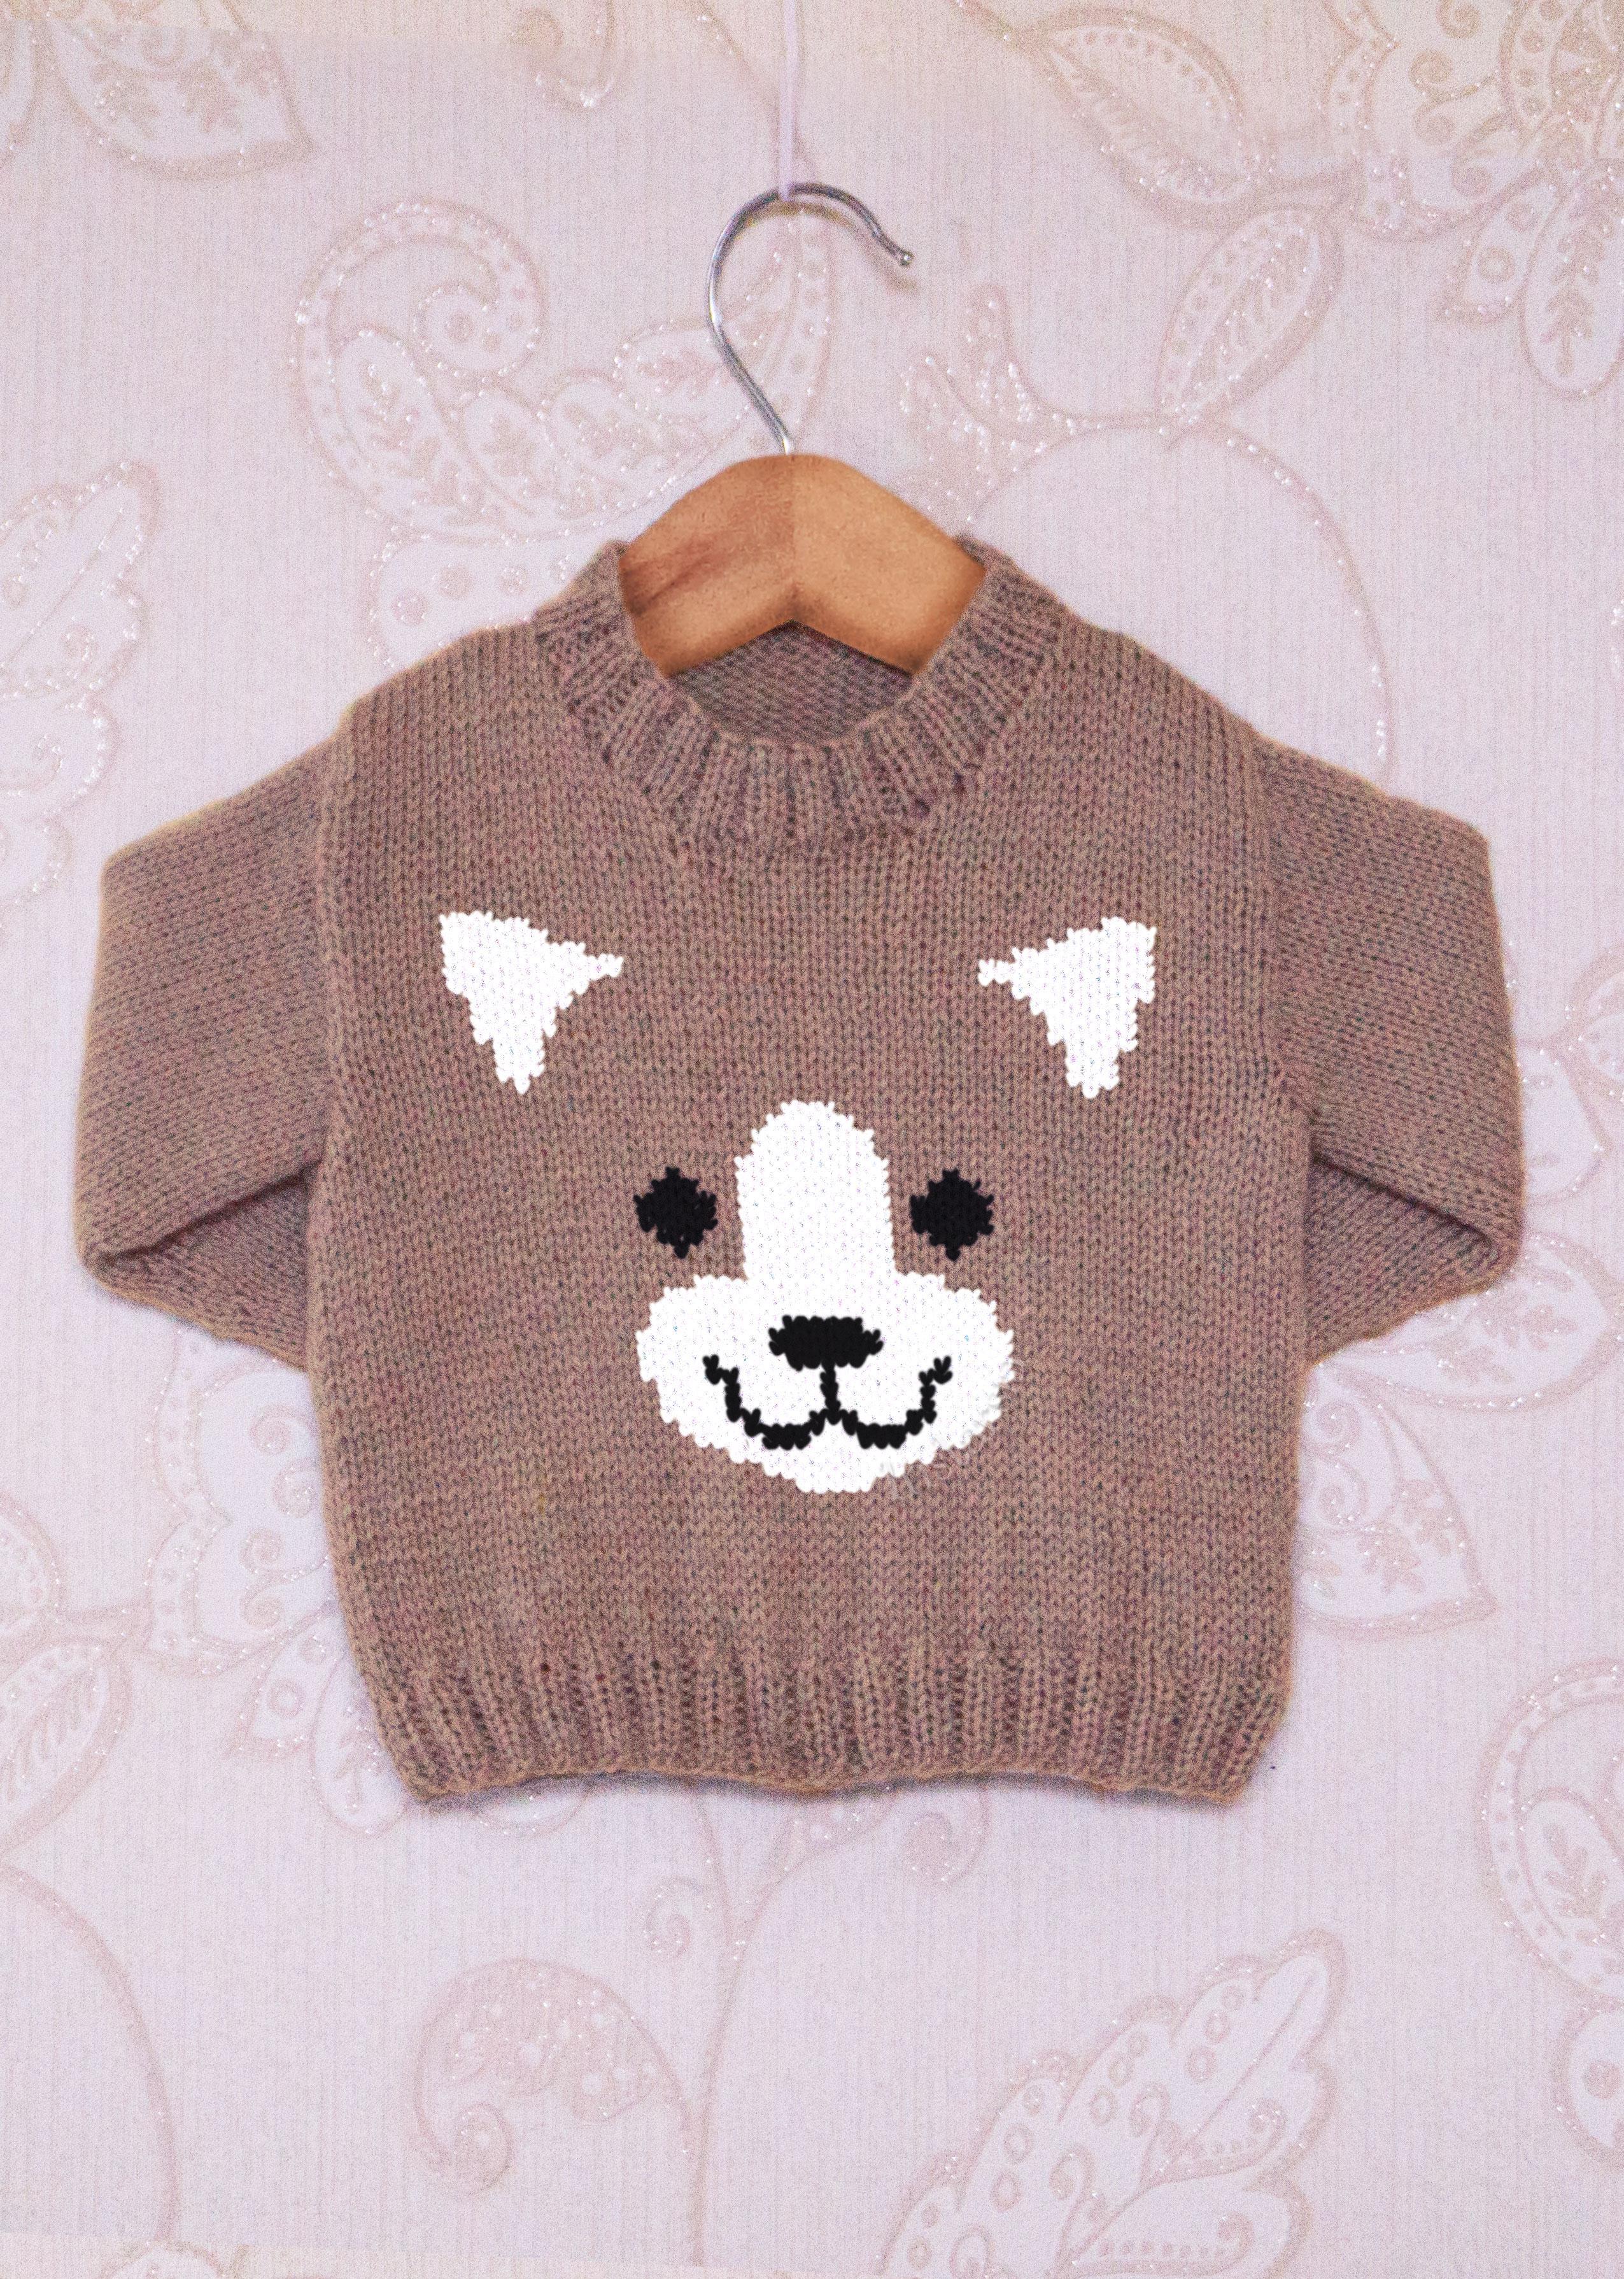 Details about   Baby Gap Girl Intersia Dog Sweater Top NwT 12-18 18-24 months 